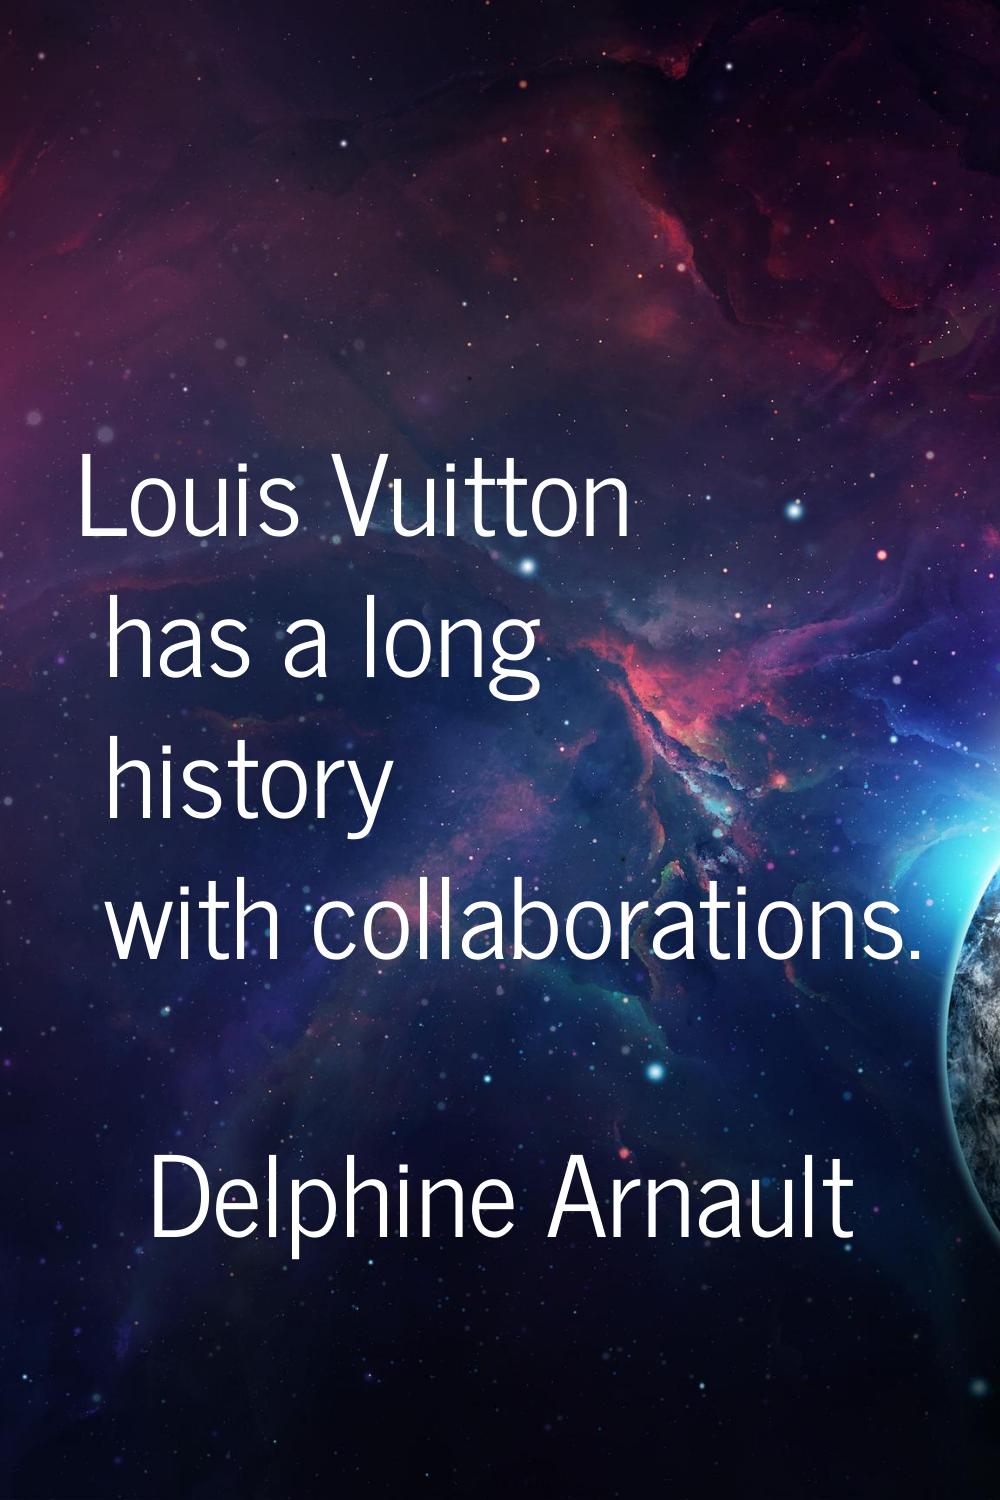 Louis Vuitton has a long history with collaborations.